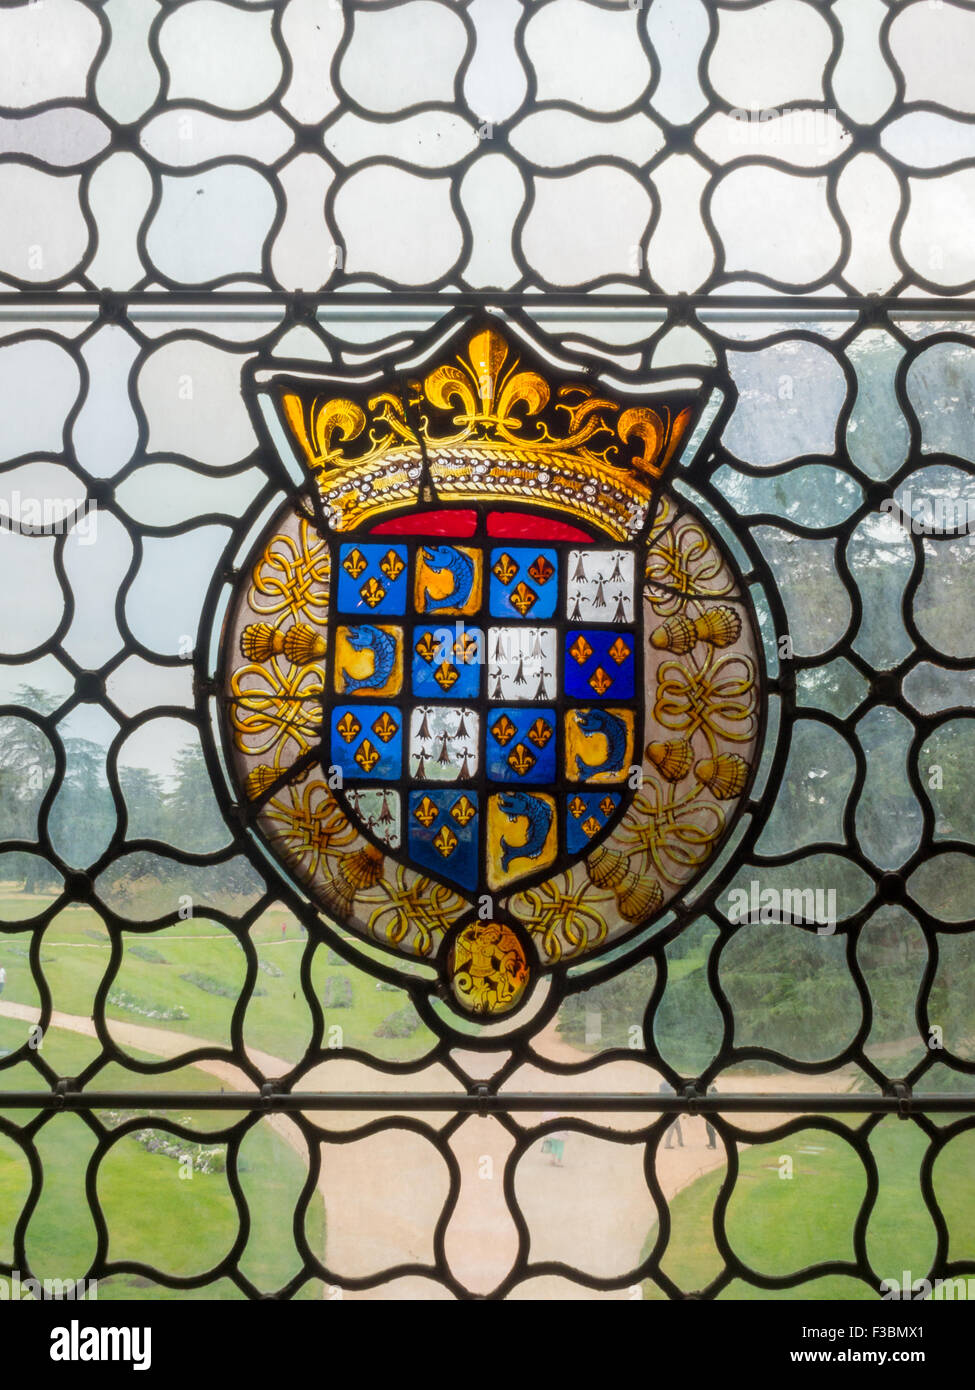 Stained glass blazon in a window of Chaumont-sur-Loire Chateau Stock Photo